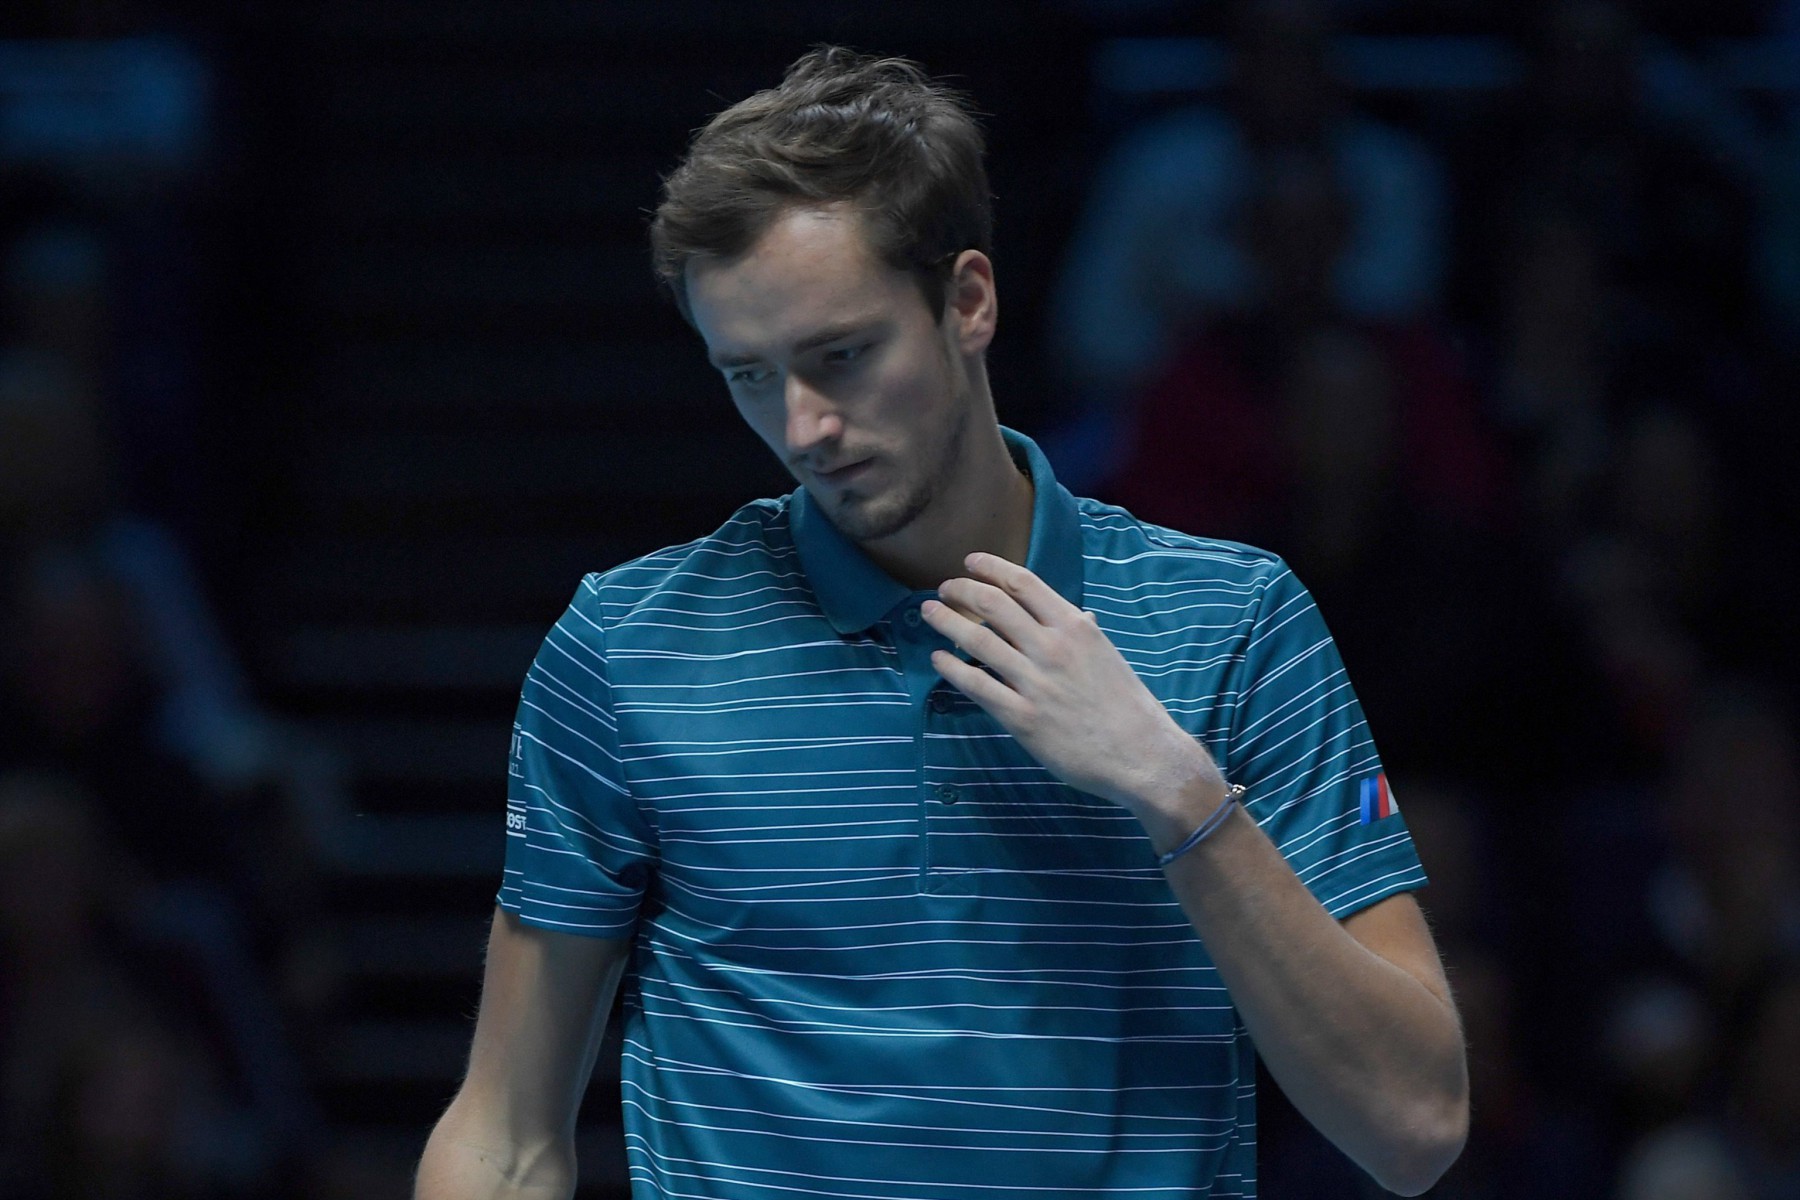 Russian Medvedev admitted he was lacking both physical and mental energy on court